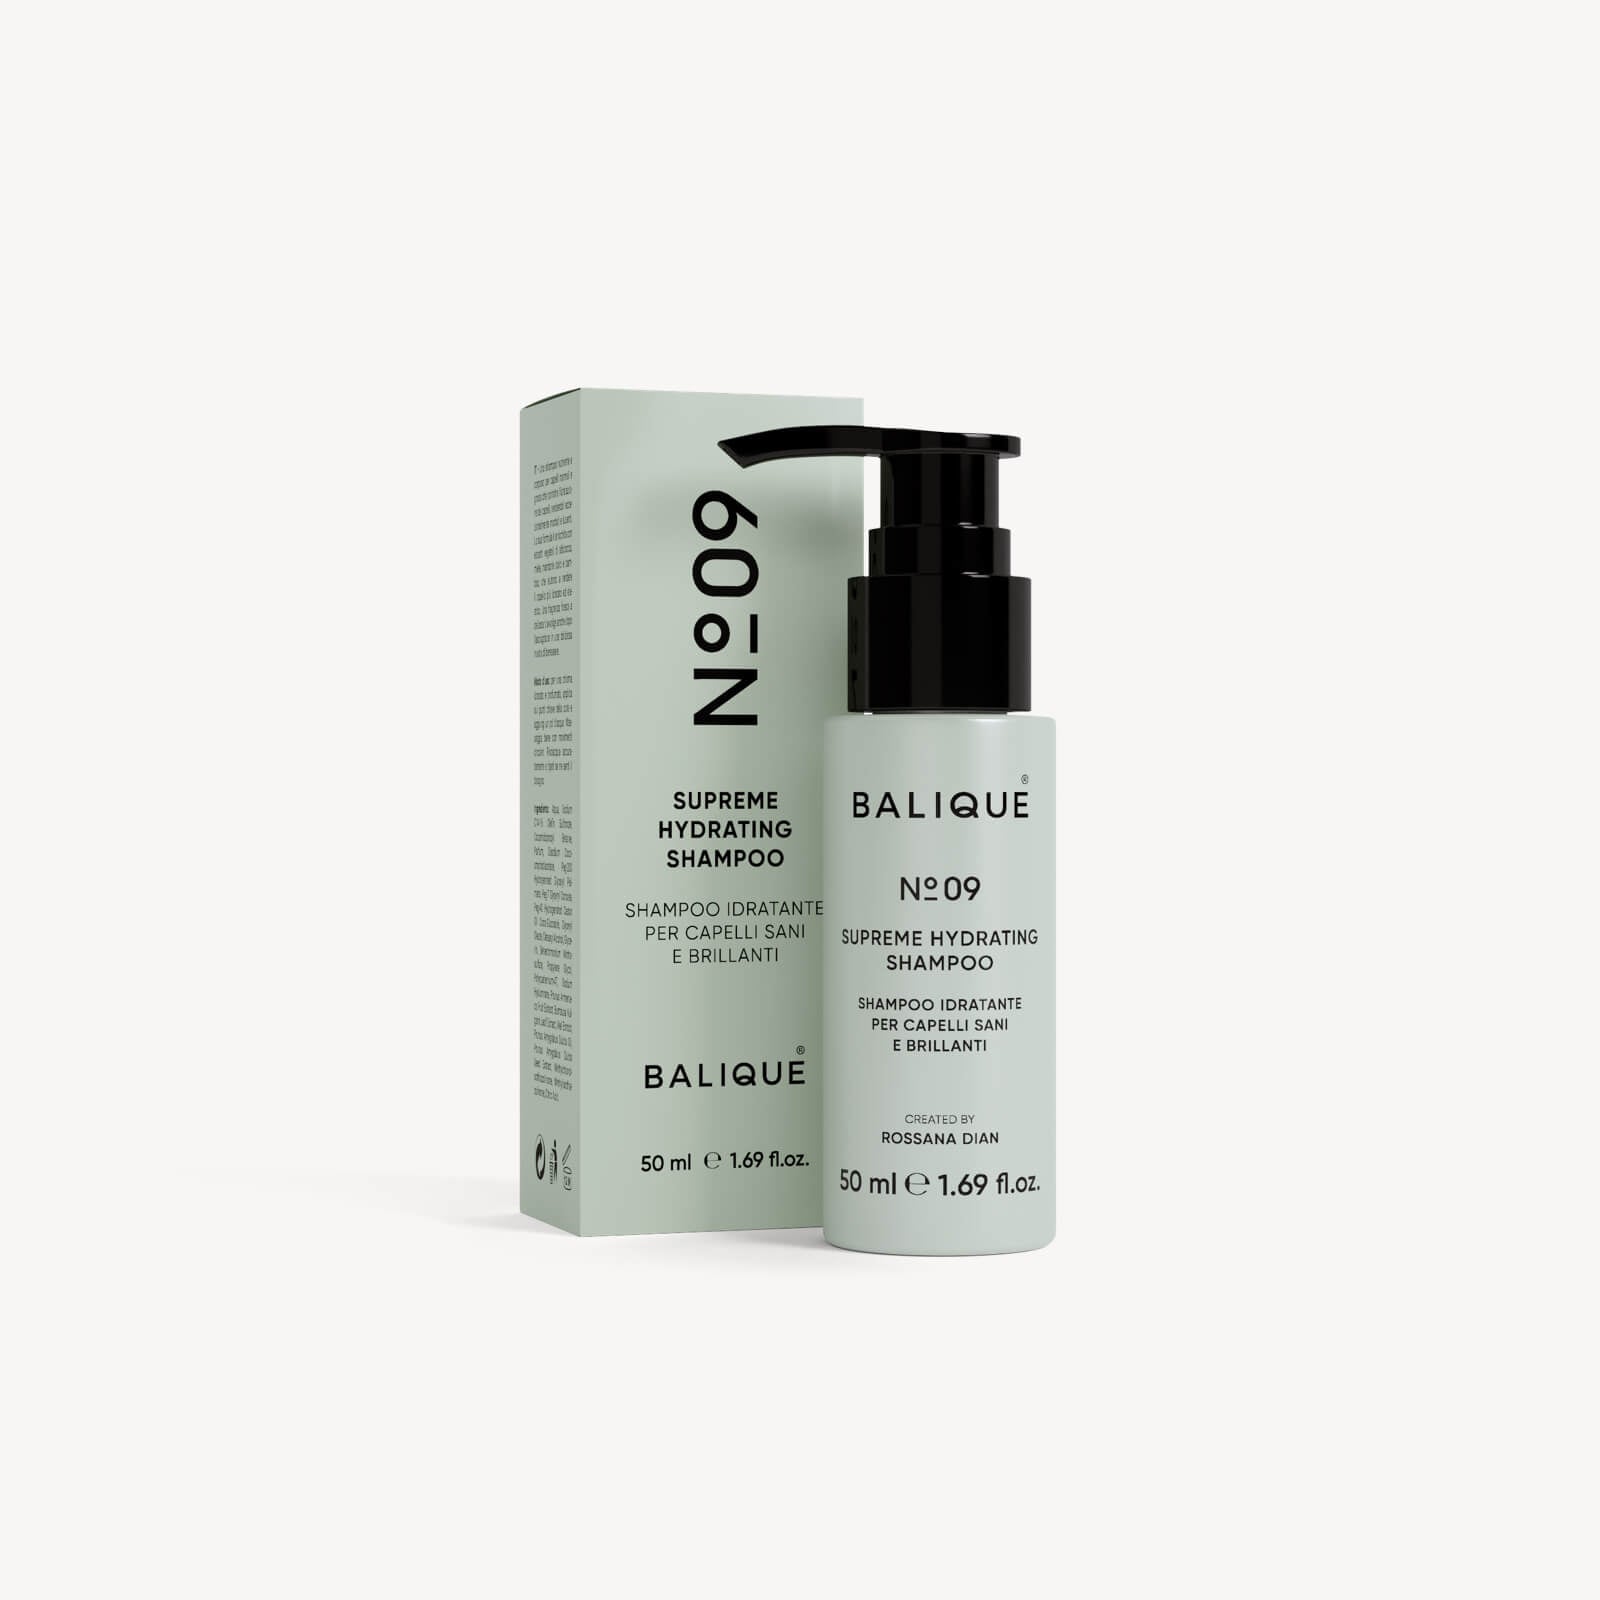 BOX 03 - TRAVEL SIZE - Untreated curly hair - Complete treatment 